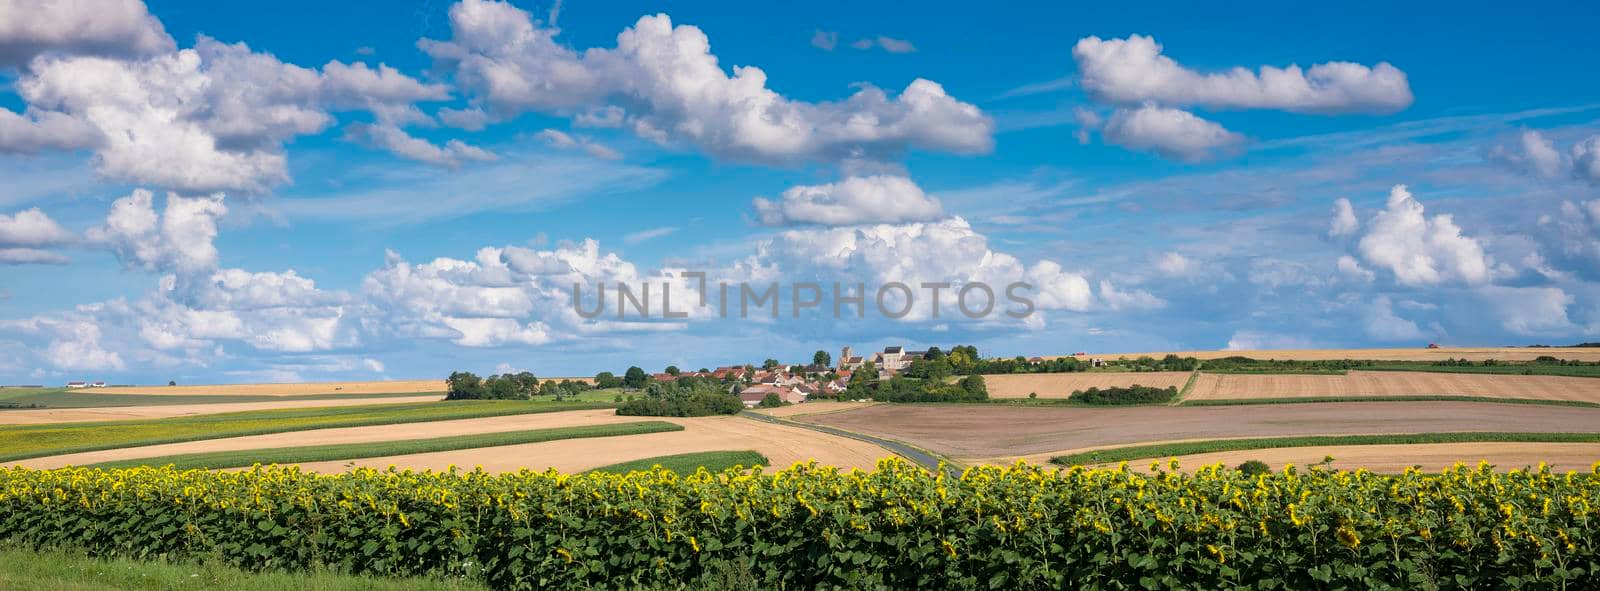 sunflower in french countryside south of reims under blue sky in summer by ahavelaar